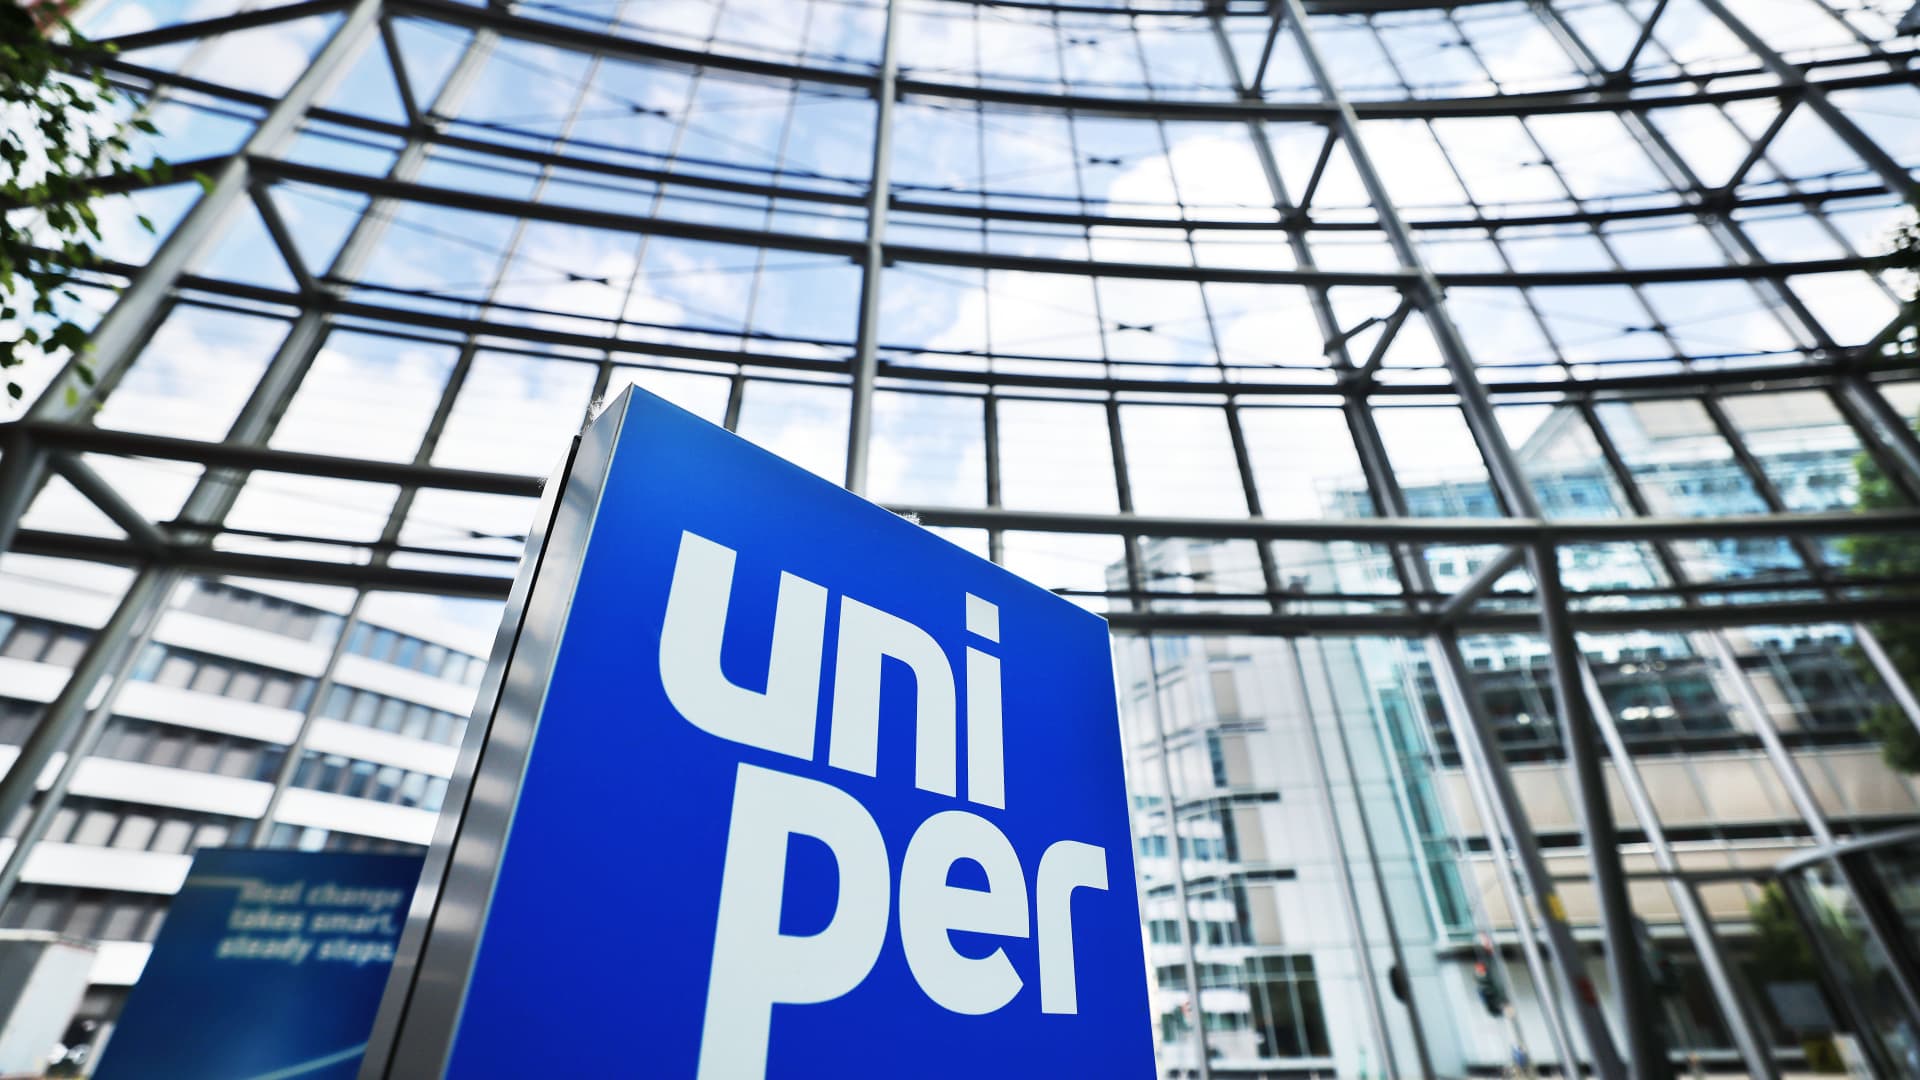 Germany nationalizes energy giant Uniper as Russia squeezes gas supplies